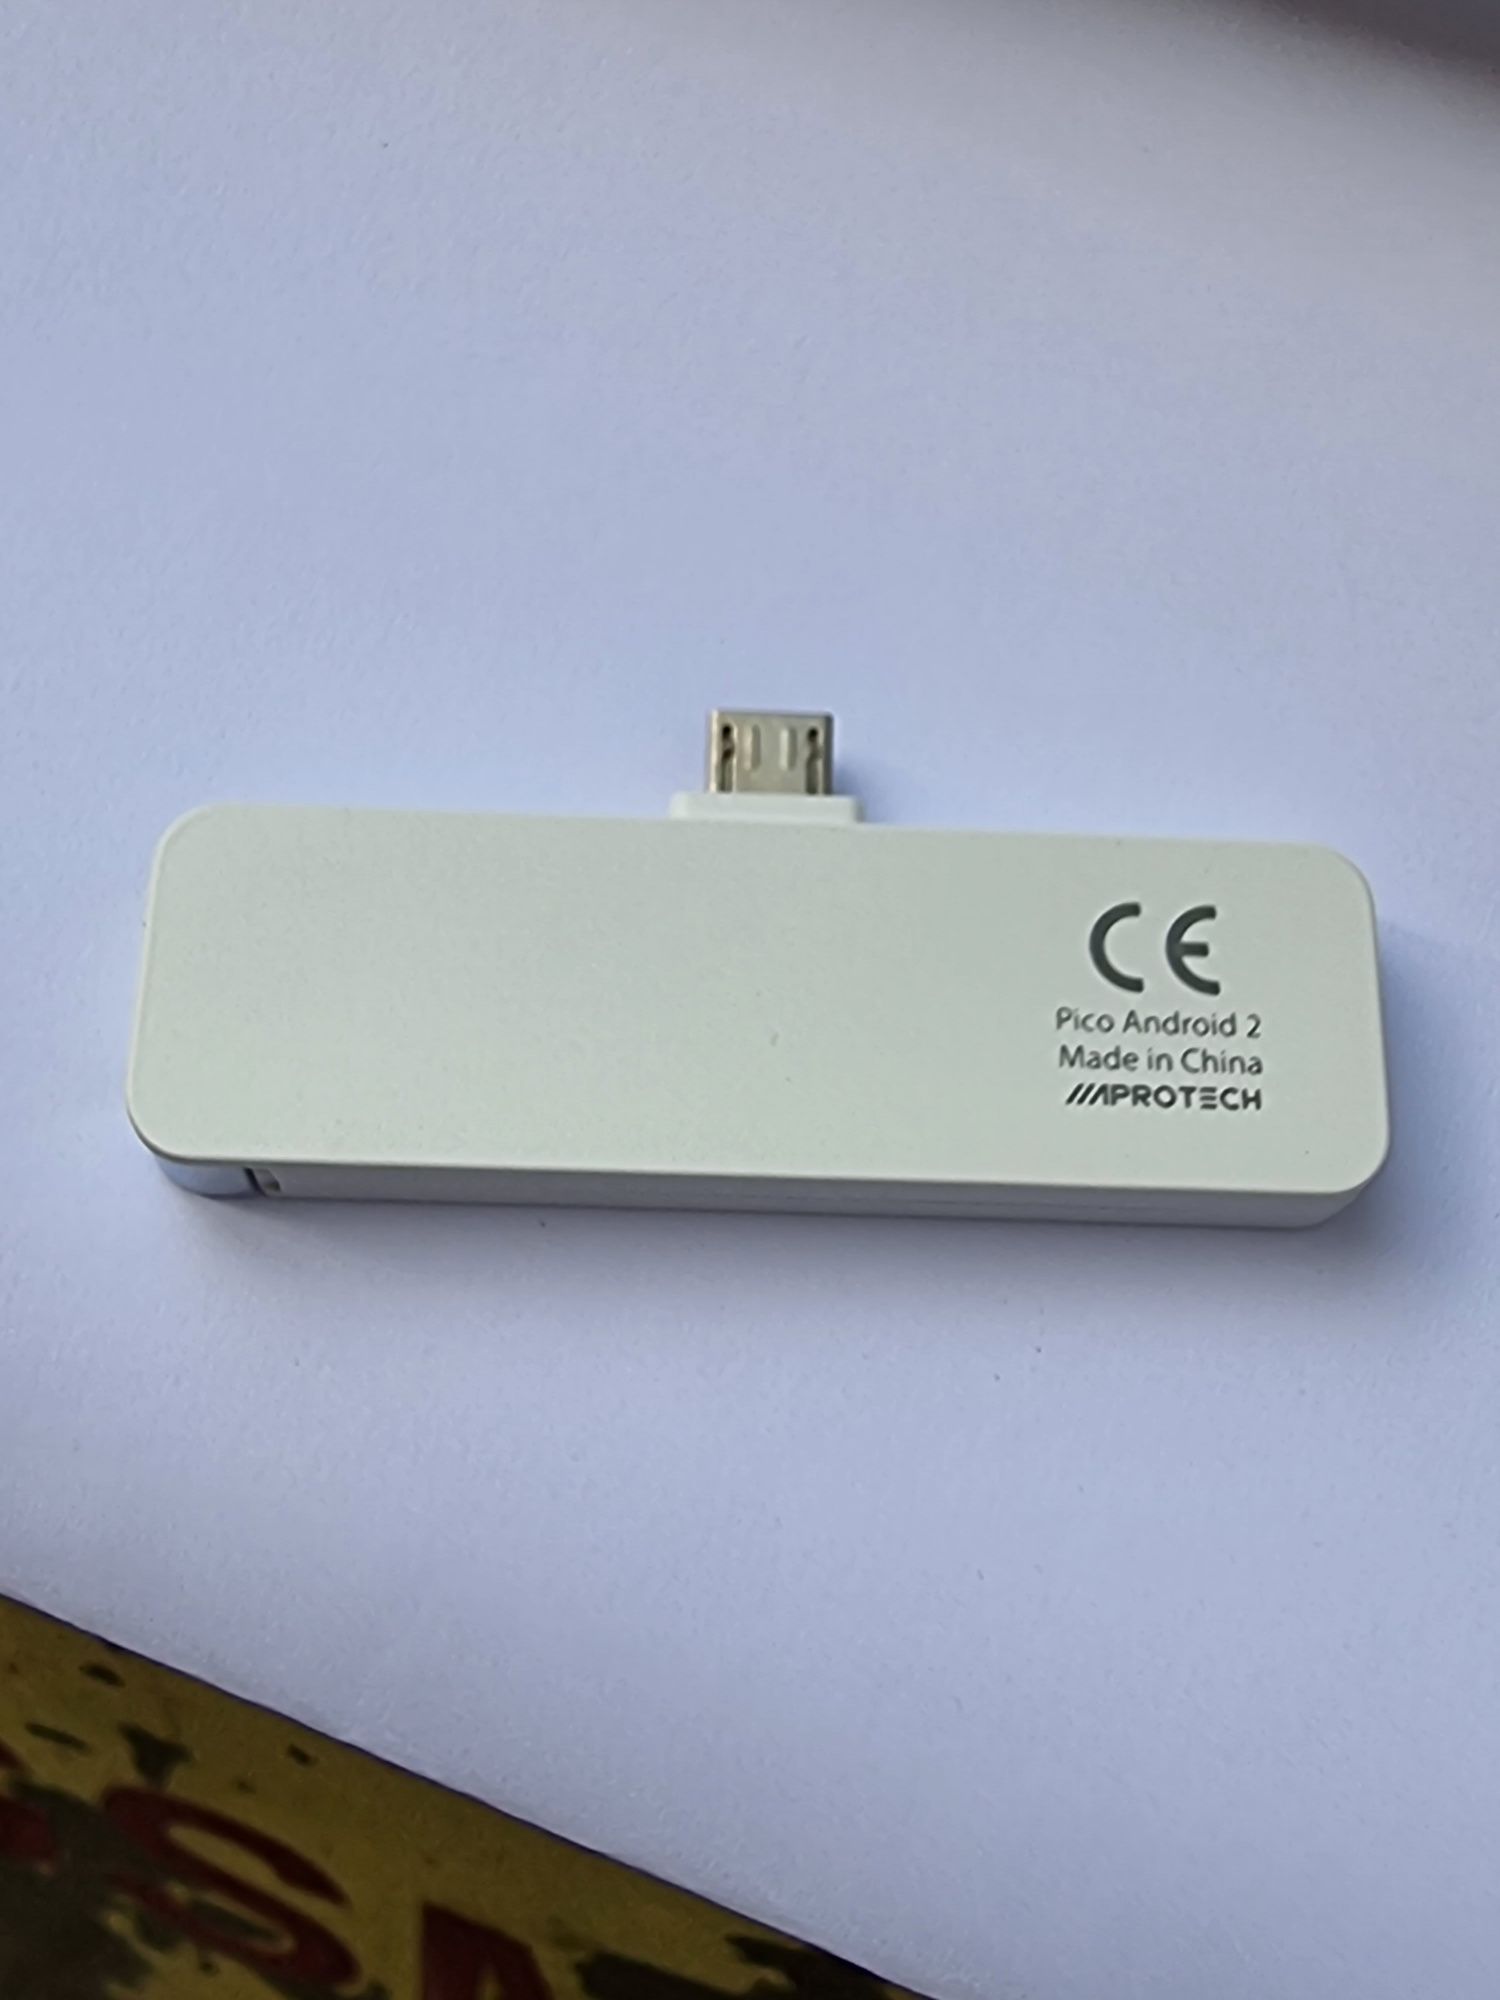 Tivizen Pico Android 2 DVB-T Receiver with Micro-USB дигитален тунер